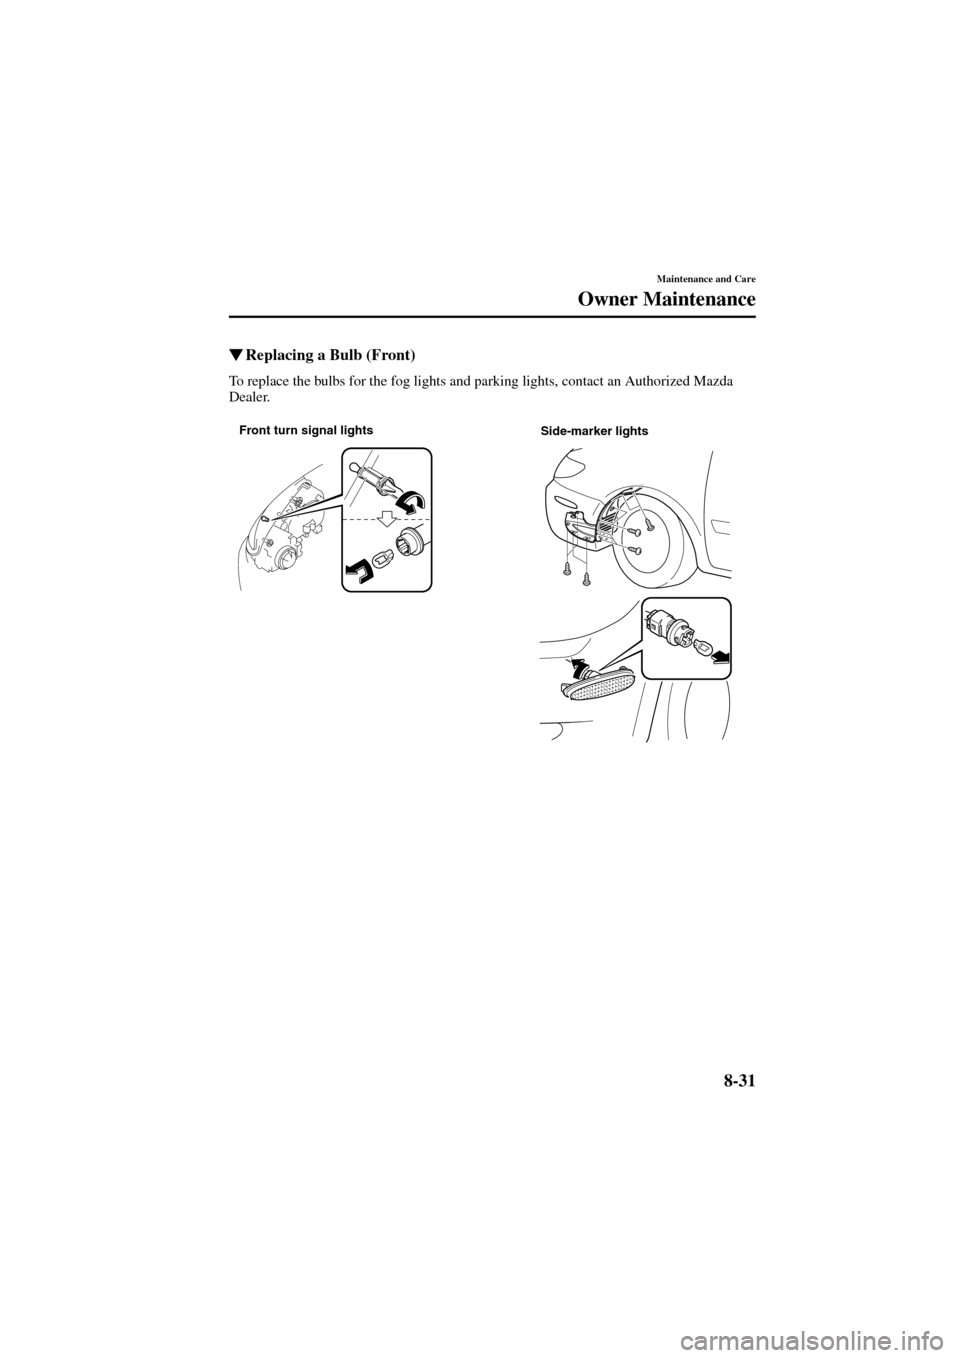 MAZDA MODEL 6 2004   (in English) Service Manual 8-31
Maintenance and Care
Owner Maintenance
Form No. 8R29-EA-02I
Replacing a Bulb (Front)
To replace the bulbs for the fog lights and parking lights, contact an Authorized Mazda 
Dealer.
Front turn s